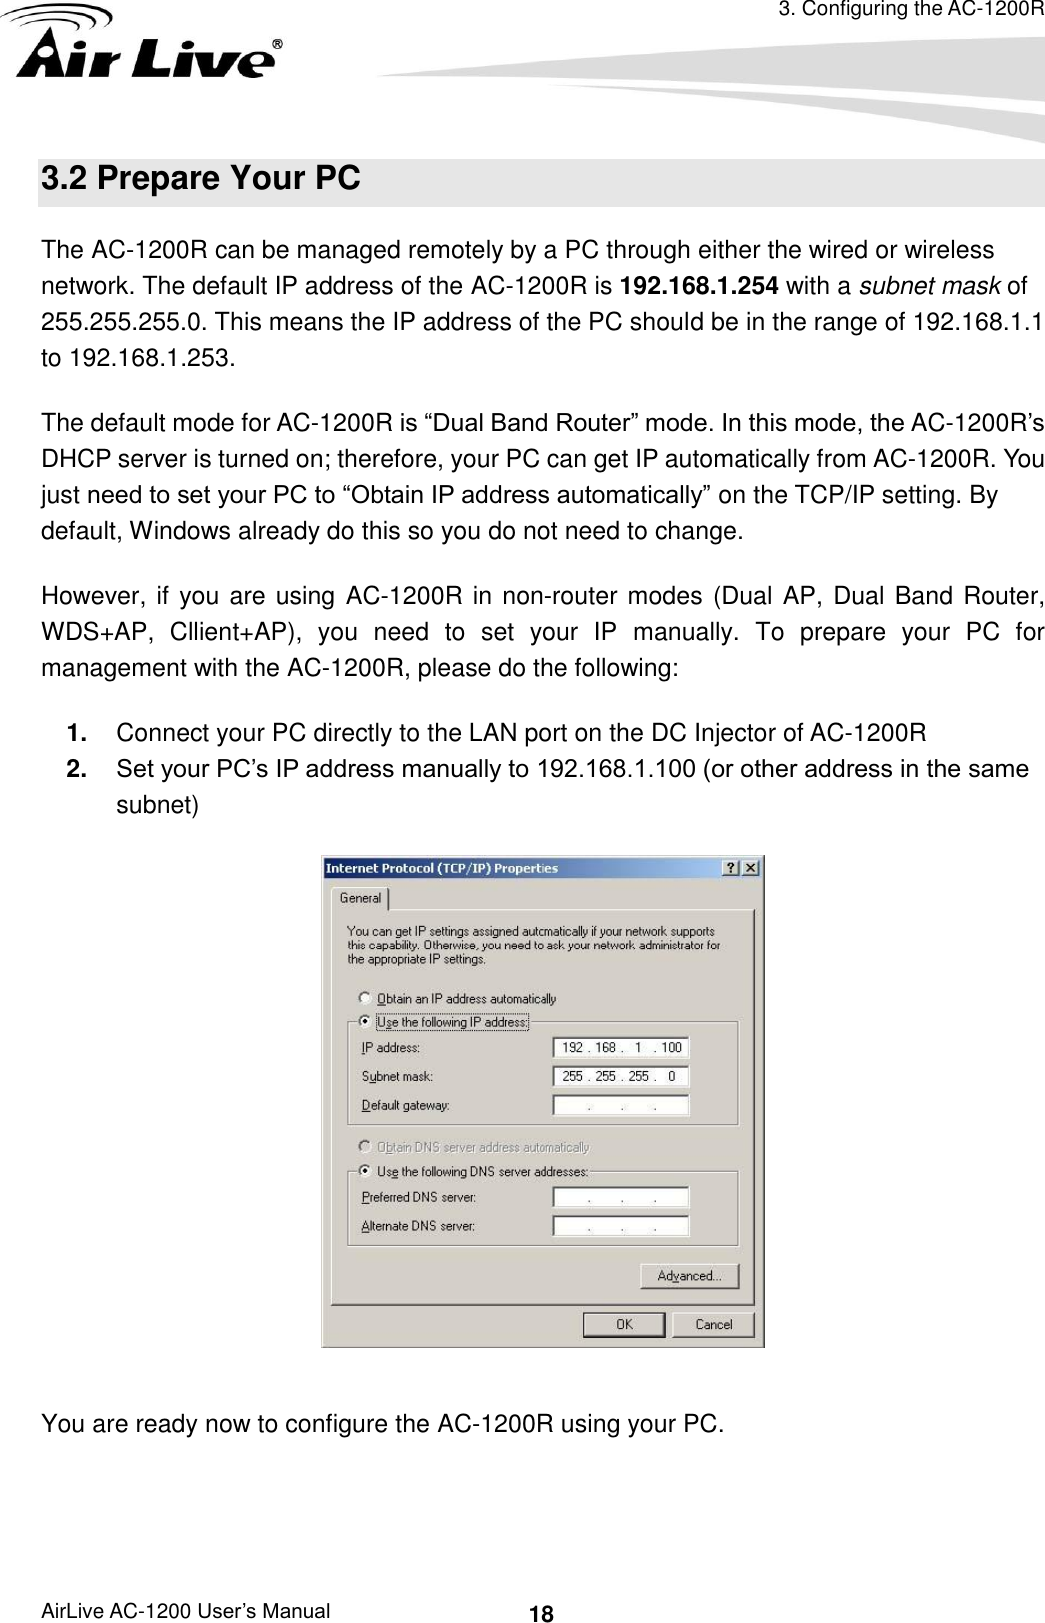 3. Configuring the AC-1200R AirLive AC-1200 User’s Manual 18 3.2 Prepare Your PC The AC-1200R can be managed remotely by a PC through either the wired or wireless network. The default IP address of the AC-1200R is 192.168.1.254 with a subnet mask of 255.255.255.0. This means the IP address of the PC should be in the range of 192.168.1.1 to 192.168.1.253.   The default mode for AC-1200R is “Dual Band Router” mode. In this mode, the AC-1200R’s DHCP server is turned on; therefore, your PC can get IP automatically from AC-1200R. You just need to set your PC to “Obtain IP address automatically” on the TCP/IP setting. By default, Windows already do this so you do not need to change. However, if you are using AC-1200R in non-router modes (Dual AP, Dual Band Router, WDS+AP,  Cllient+AP),  you  need  to  set  your  IP  manually.  To  prepare  your  PC  for management with the AC-1200R, please do the following: 1. Connect your PC directly to the LAN port on the DC Injector of AC-1200R 2. Set your PC’s IP address manually to 192.168.1.100 (or other address in the same subnet)   You are ready now to configure the AC-1200R using your PC.      